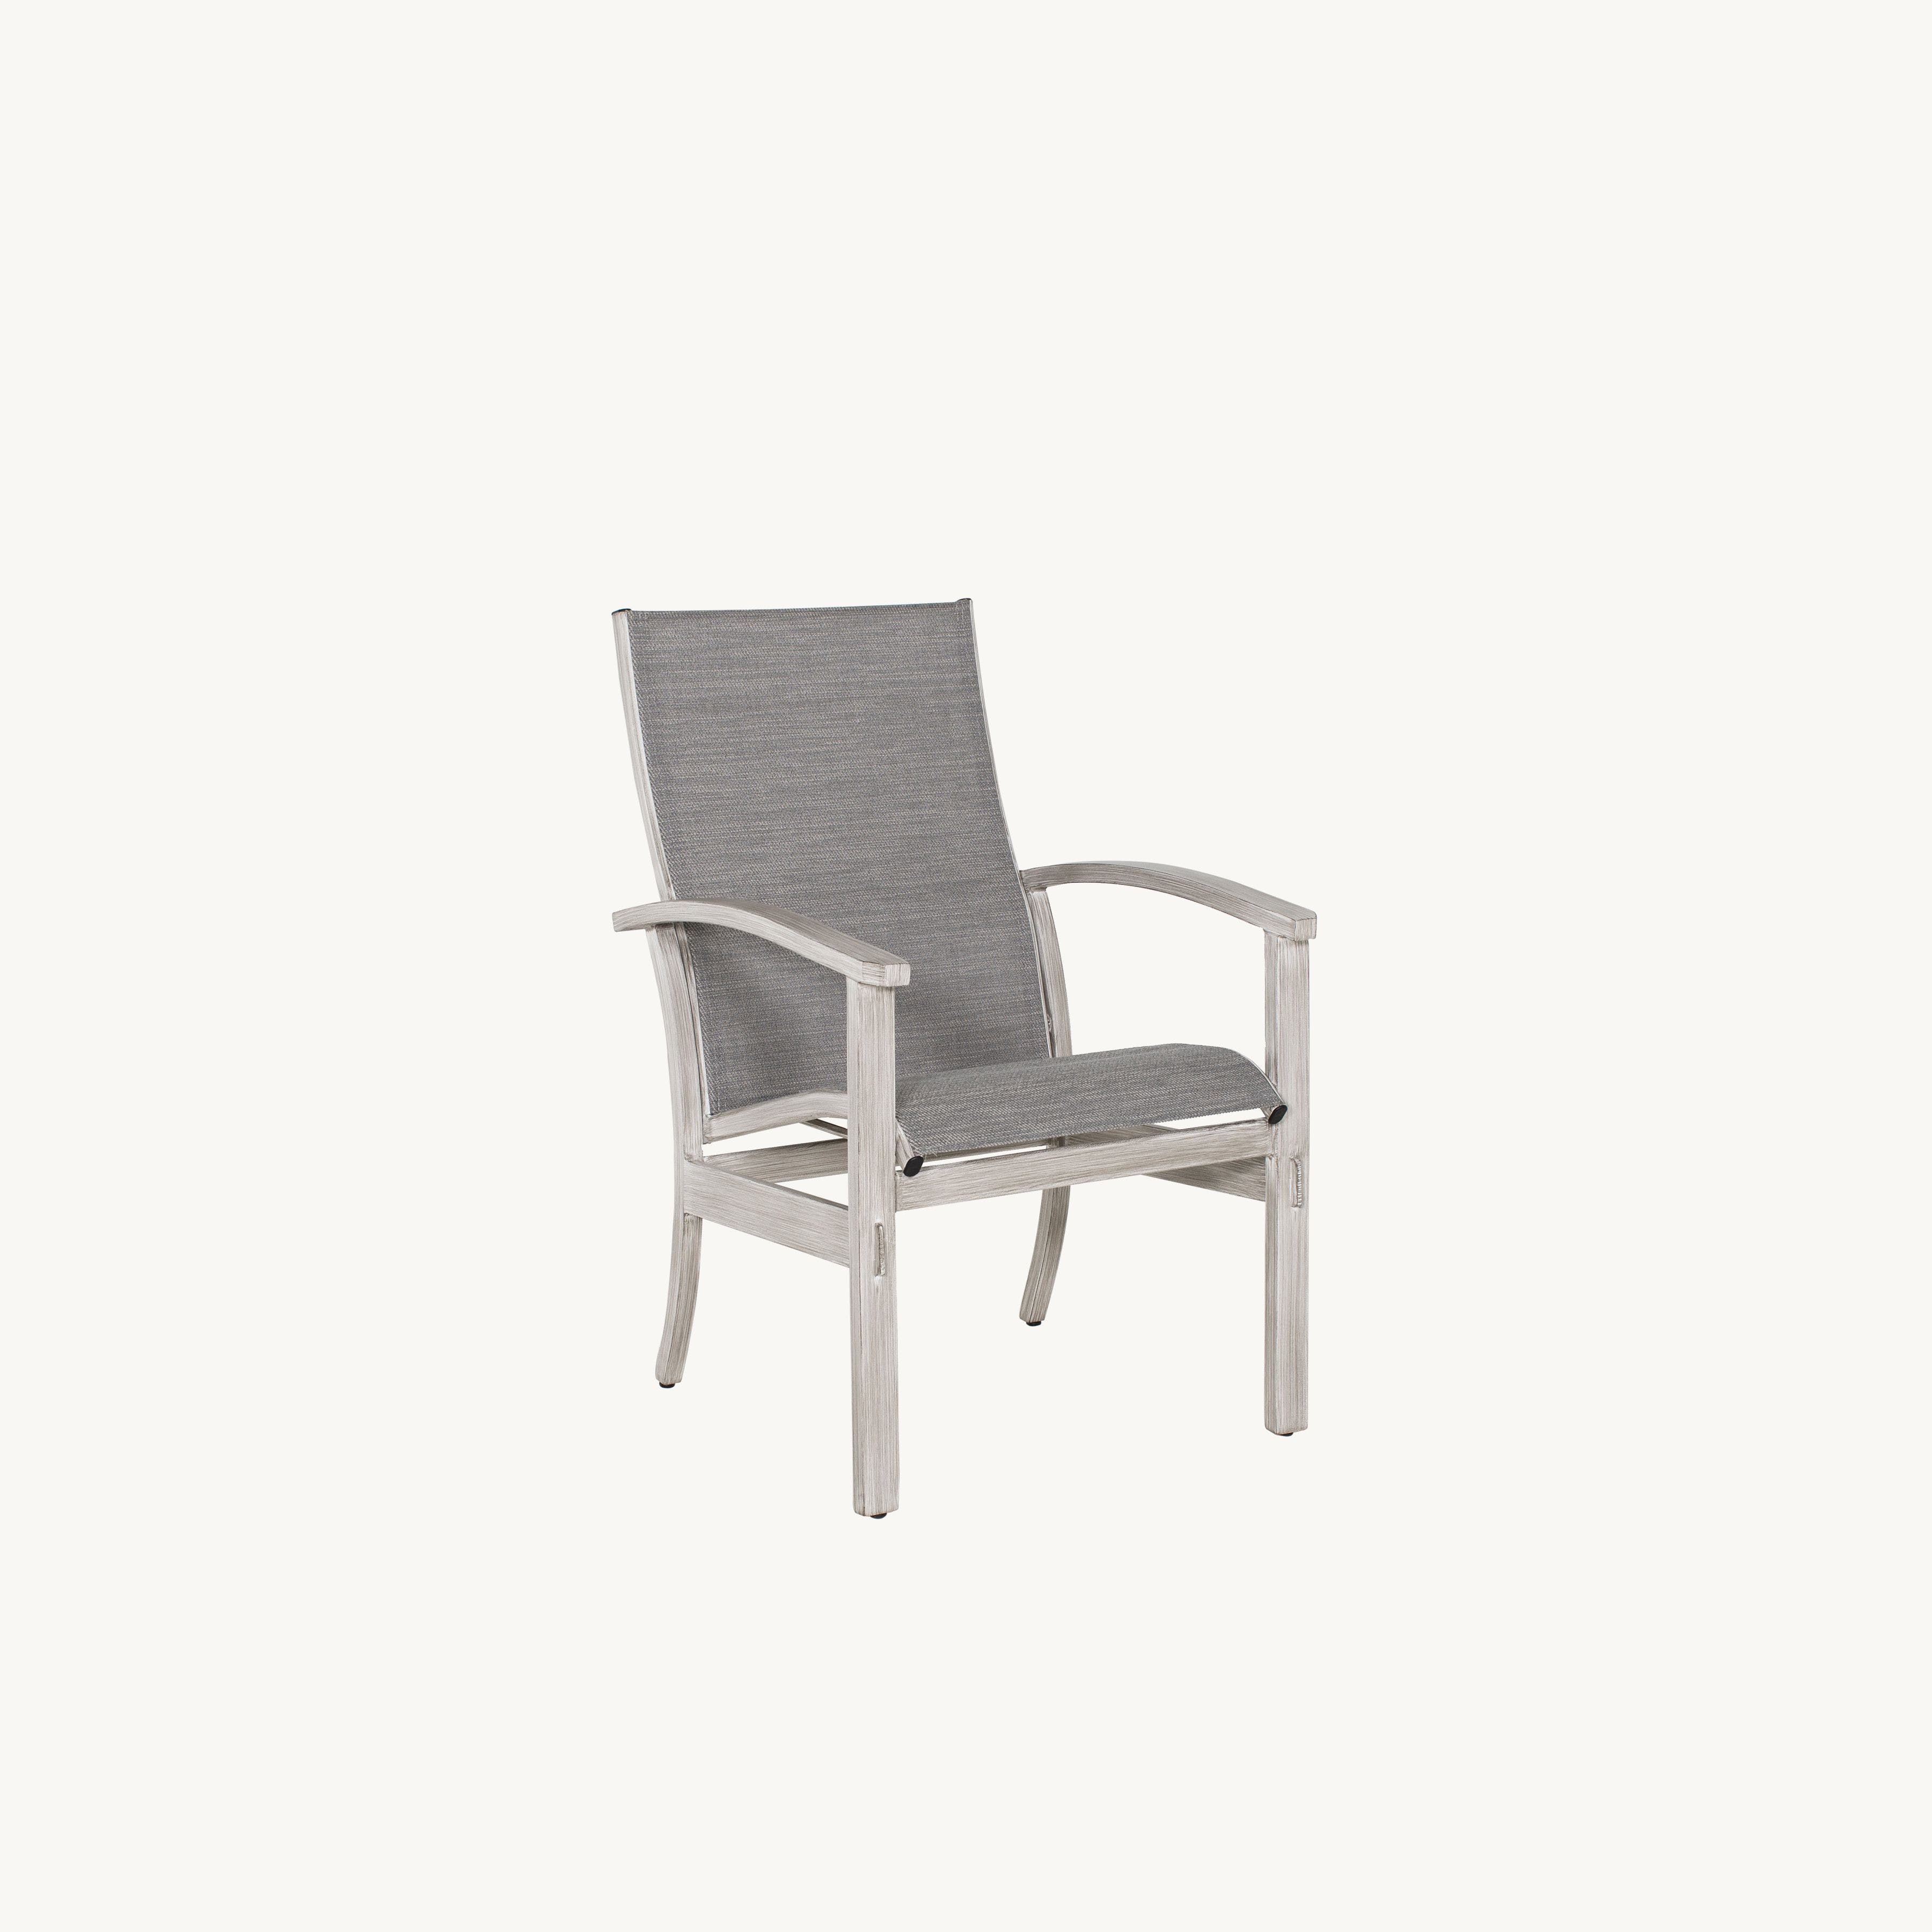 Antler Hill Sling Dining Chair By Castelle